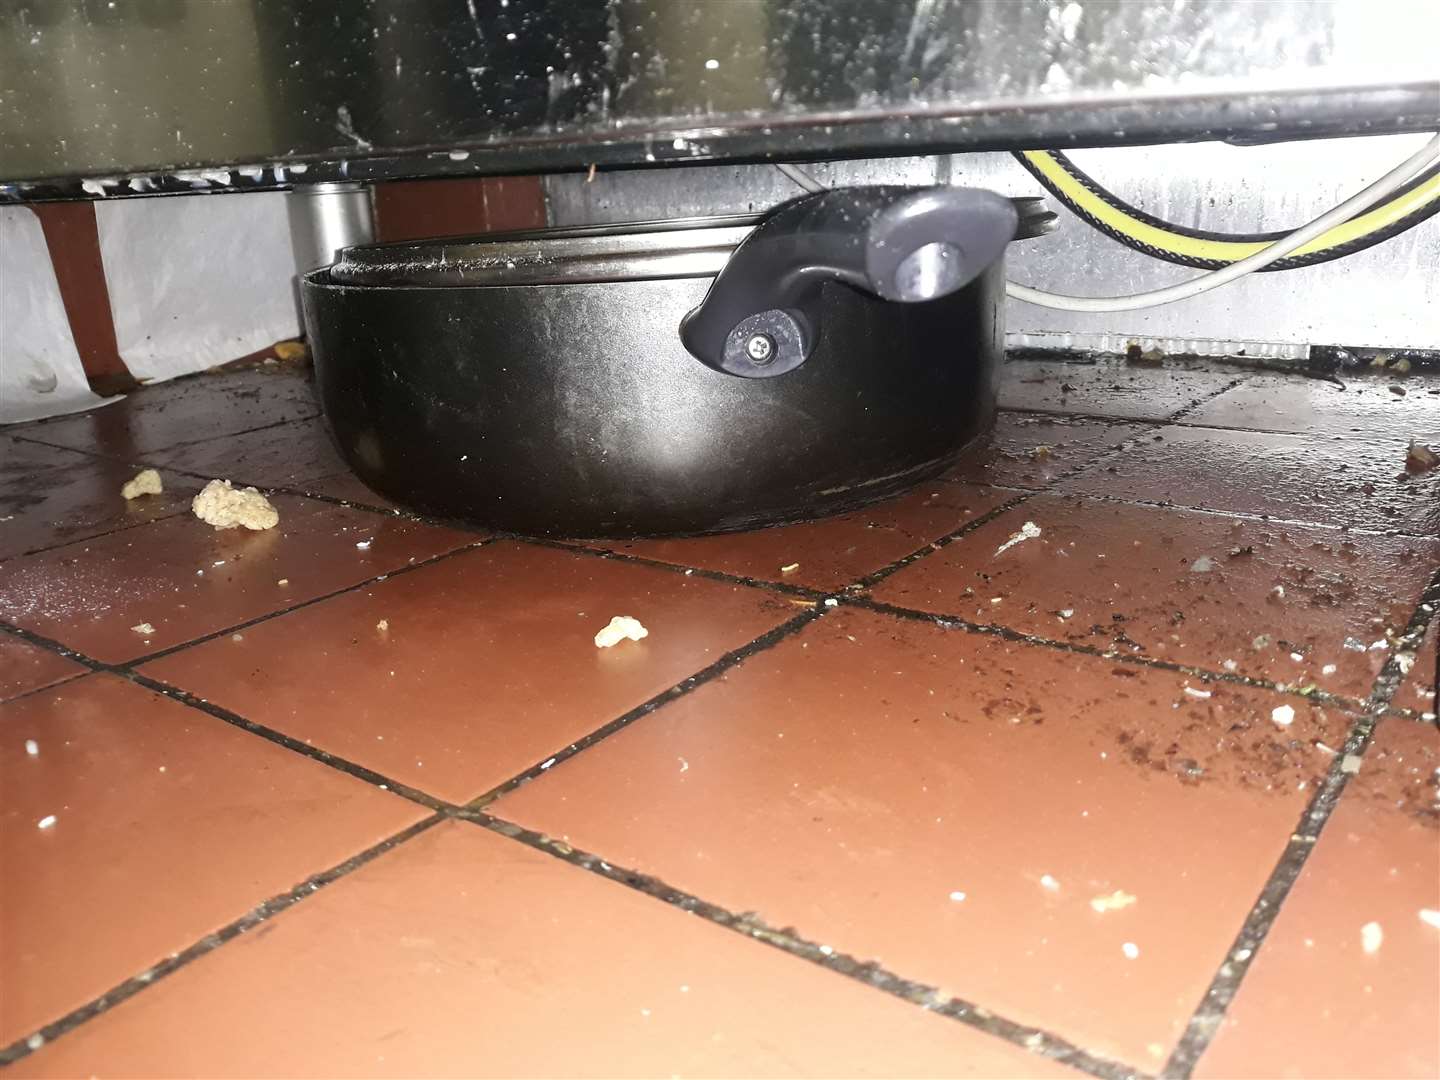 Food, grease and oil were found beneath the cooking range